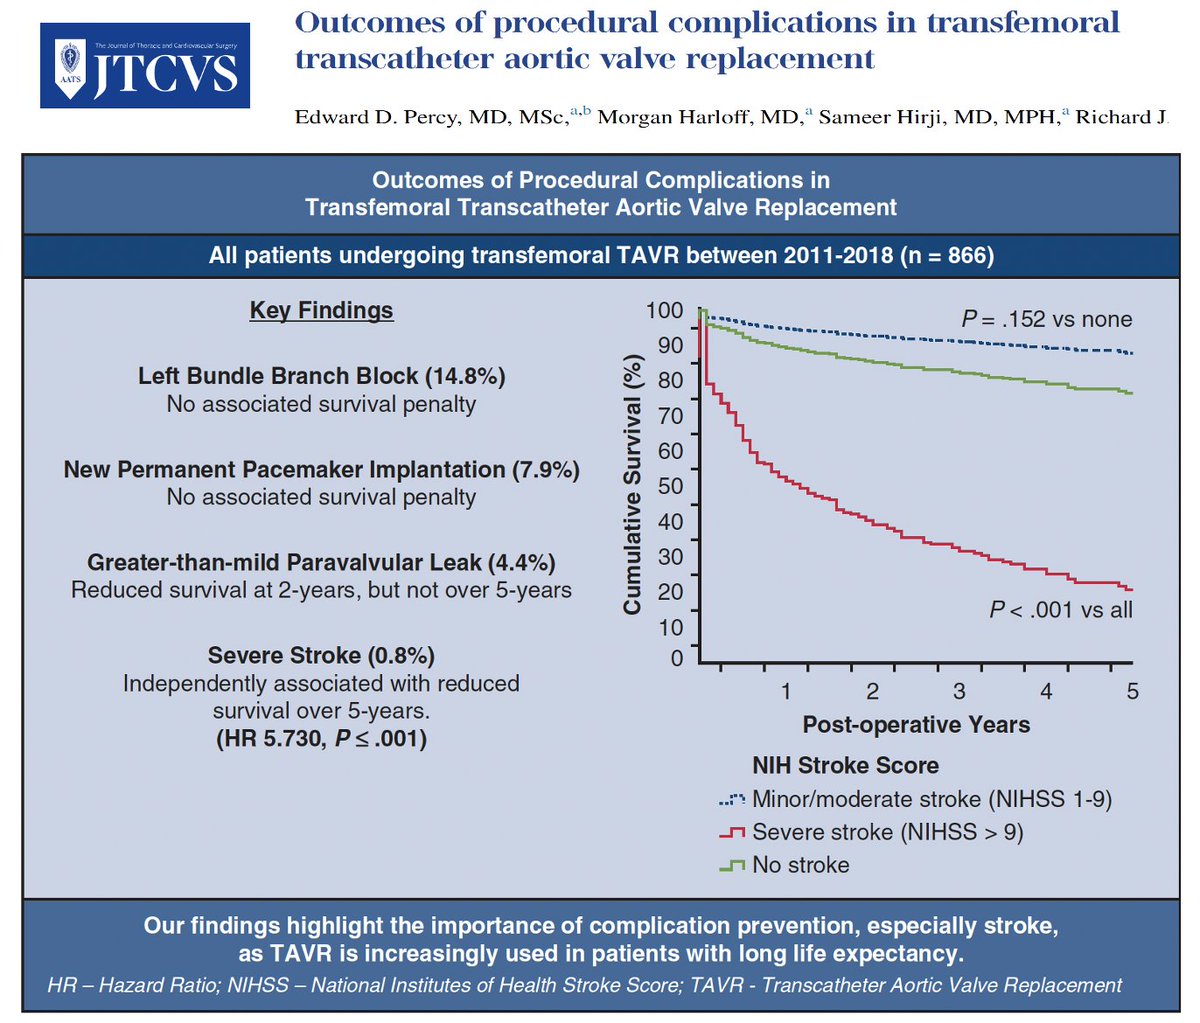 📌The complications of stroke, paravalvular leak and pacemaker can affect the long term outcome from transfemoral TAVR. Low risk TAVR should focus on reducing these. ➡️jtcvs.org/article/S0022-…